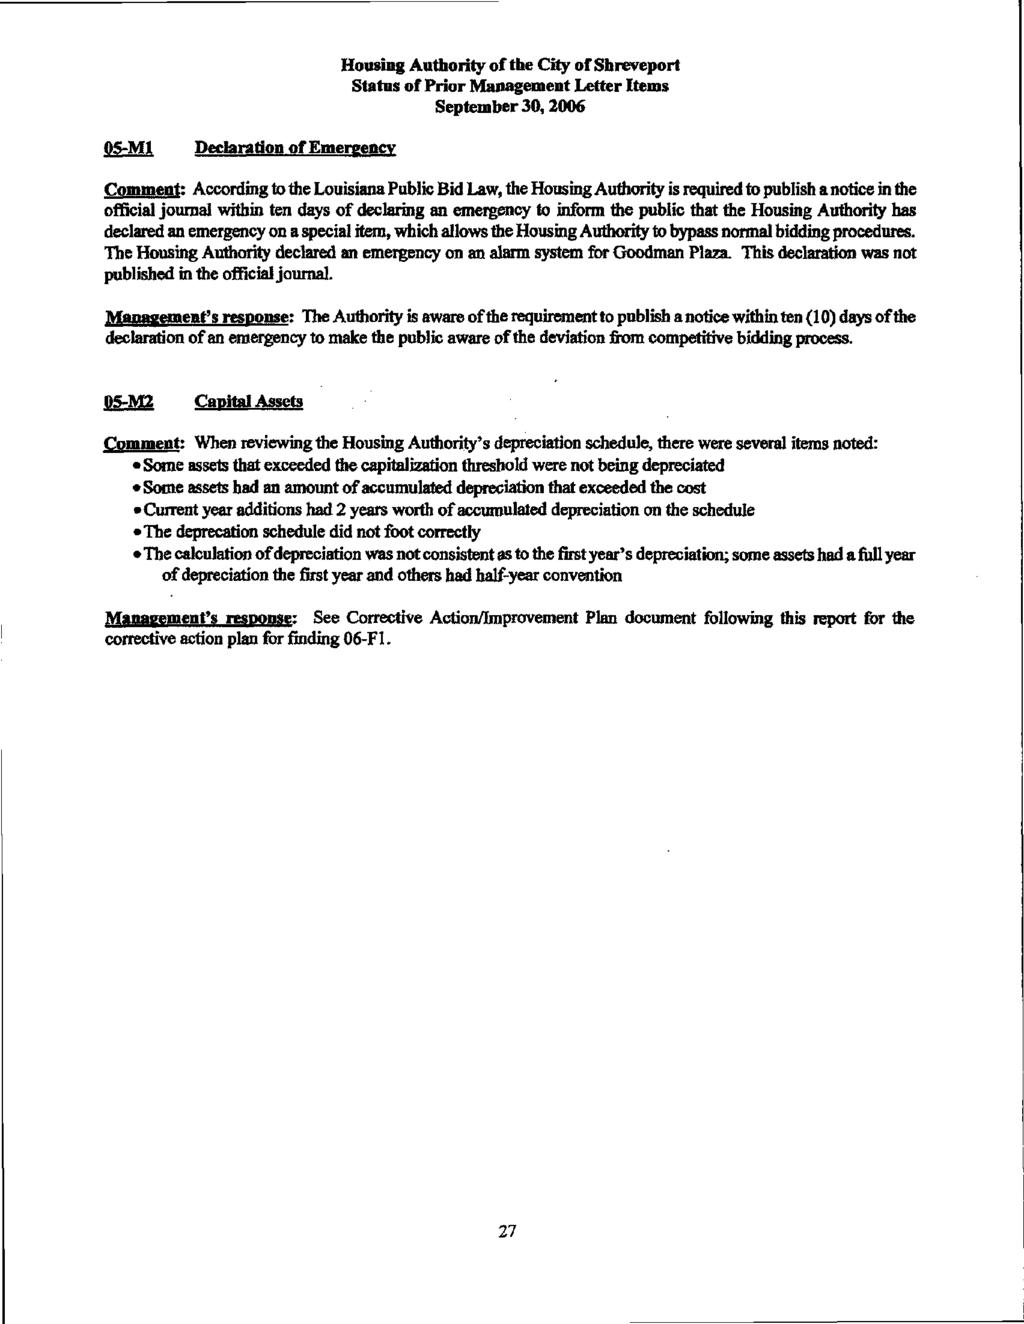 5-M1 Declaration of Emergency Housing Authority of the City of Shreveport Status of Prior Management Letter Items September 3,26 Comment: According to the Louisiana Public Bid Law, the Housing